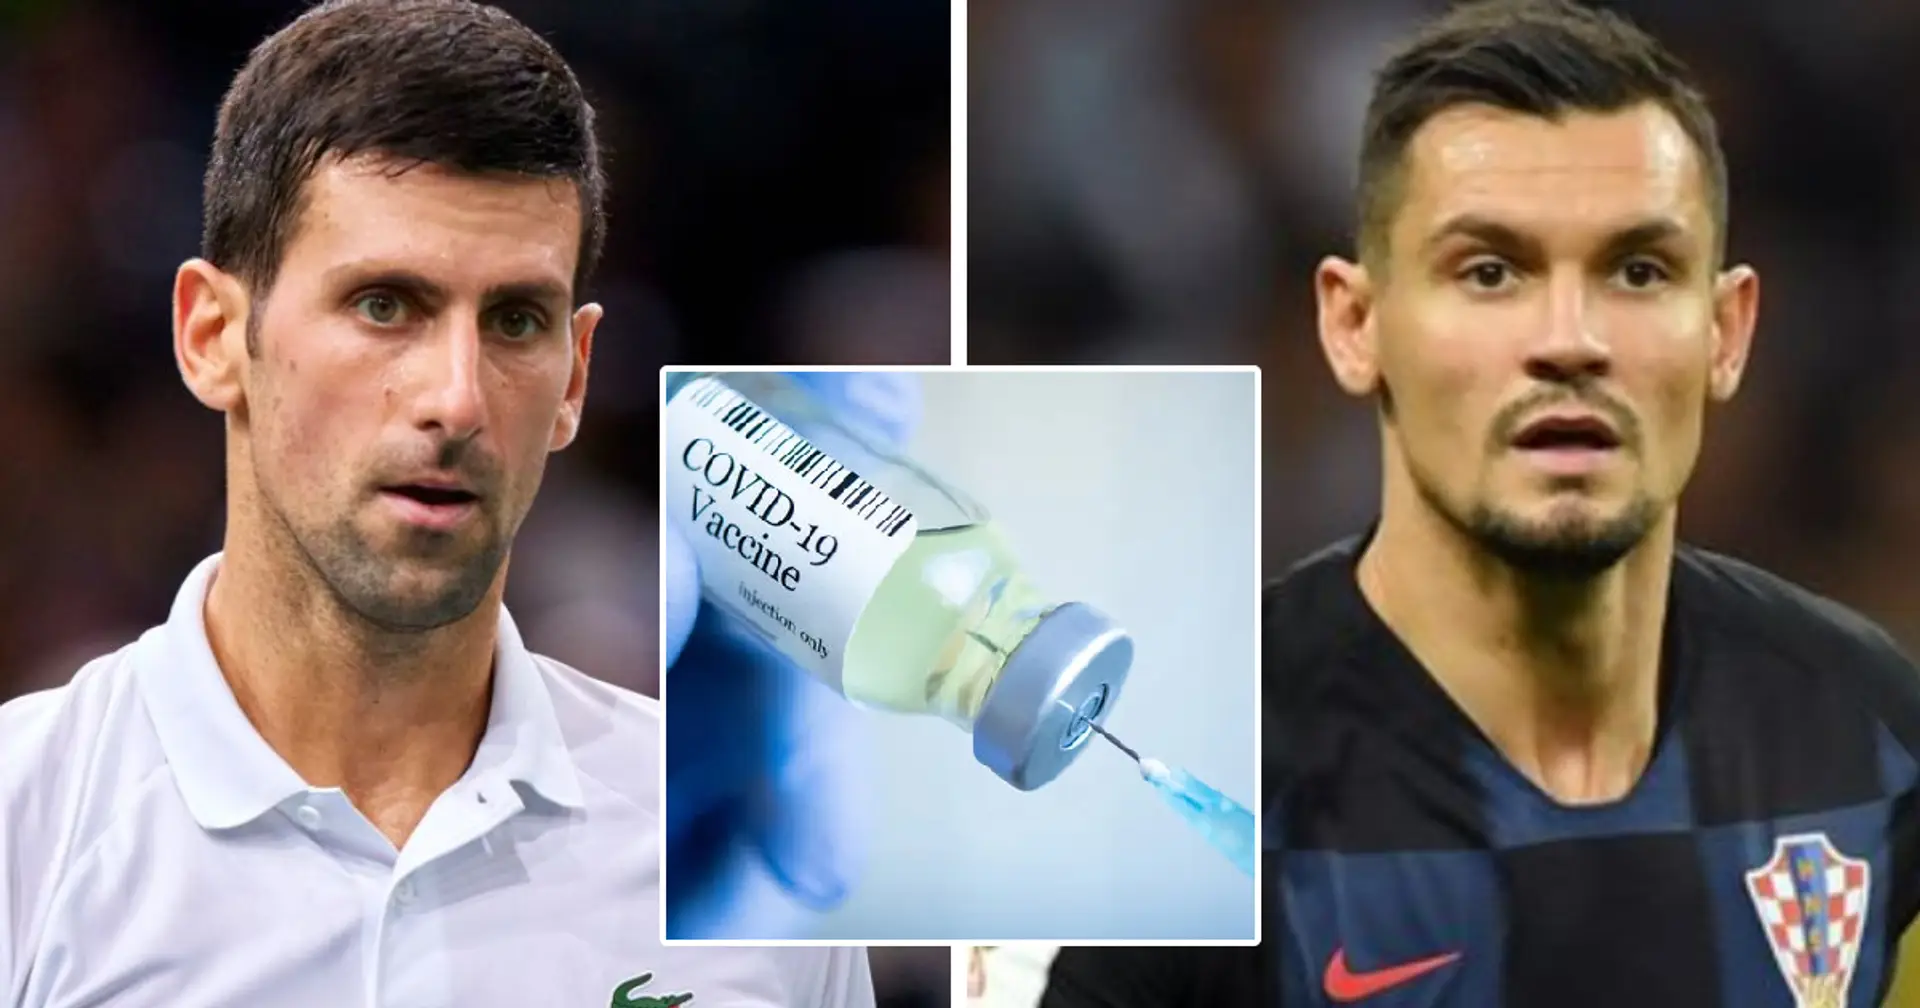 'Hold on, Nole': Dejan Lovren publicly supports Novak Djokovic after tennis legend is barred from entering Australia due to vaccination status